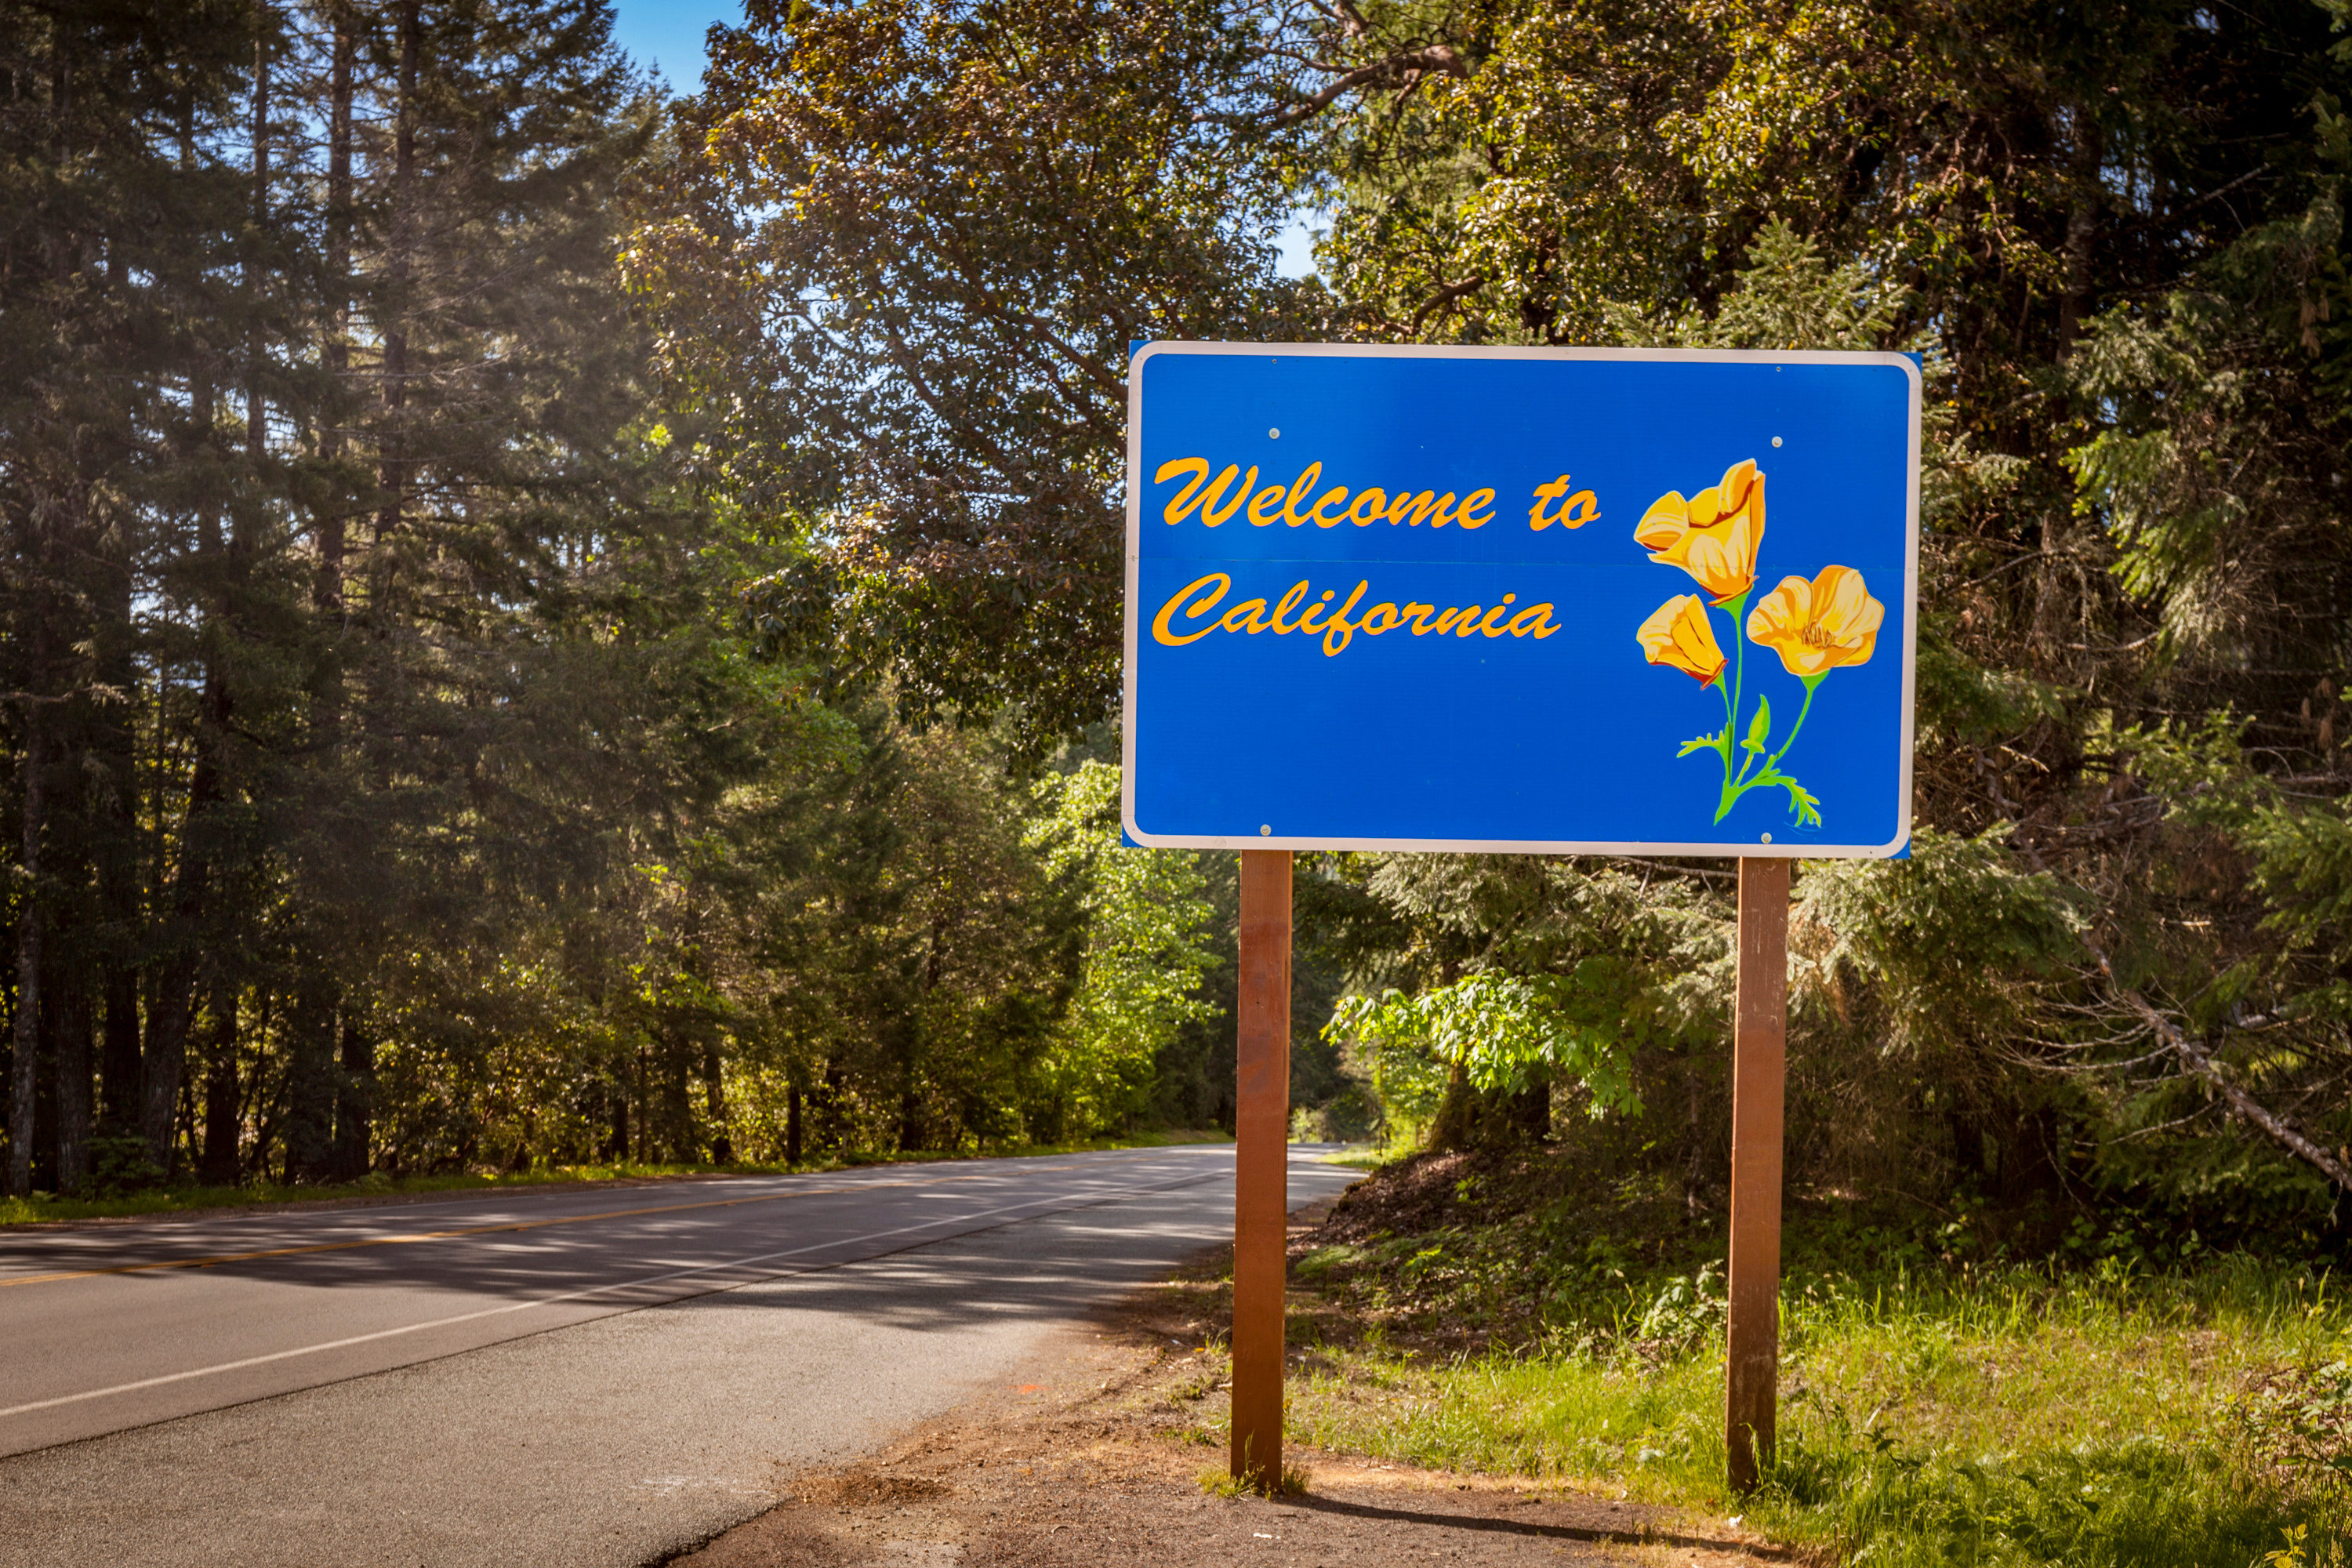 Image is of a blue sign with the words Welcome to California in gold letters and golden poppies on it. The sign is beside a road leading into a redwood forest.